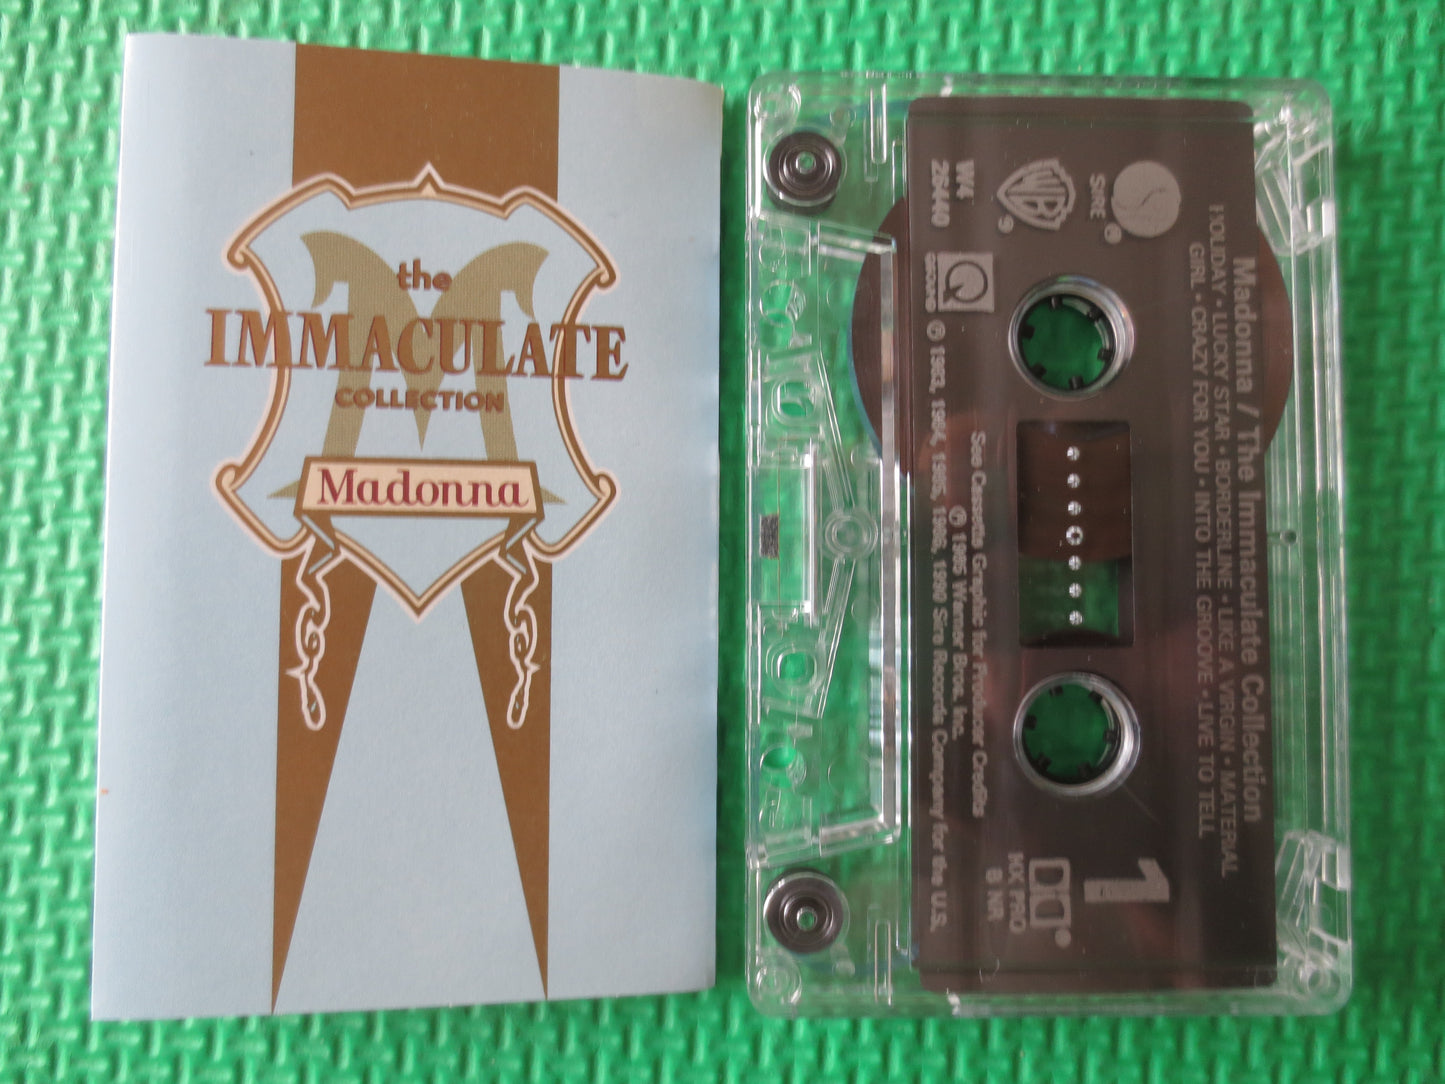 MADONNA, IMMACULATE Collection, MADONNA Cassette, Madonna Album, Tape Cassette, Madonna Tape, Music Cassette, 1990 Cassette